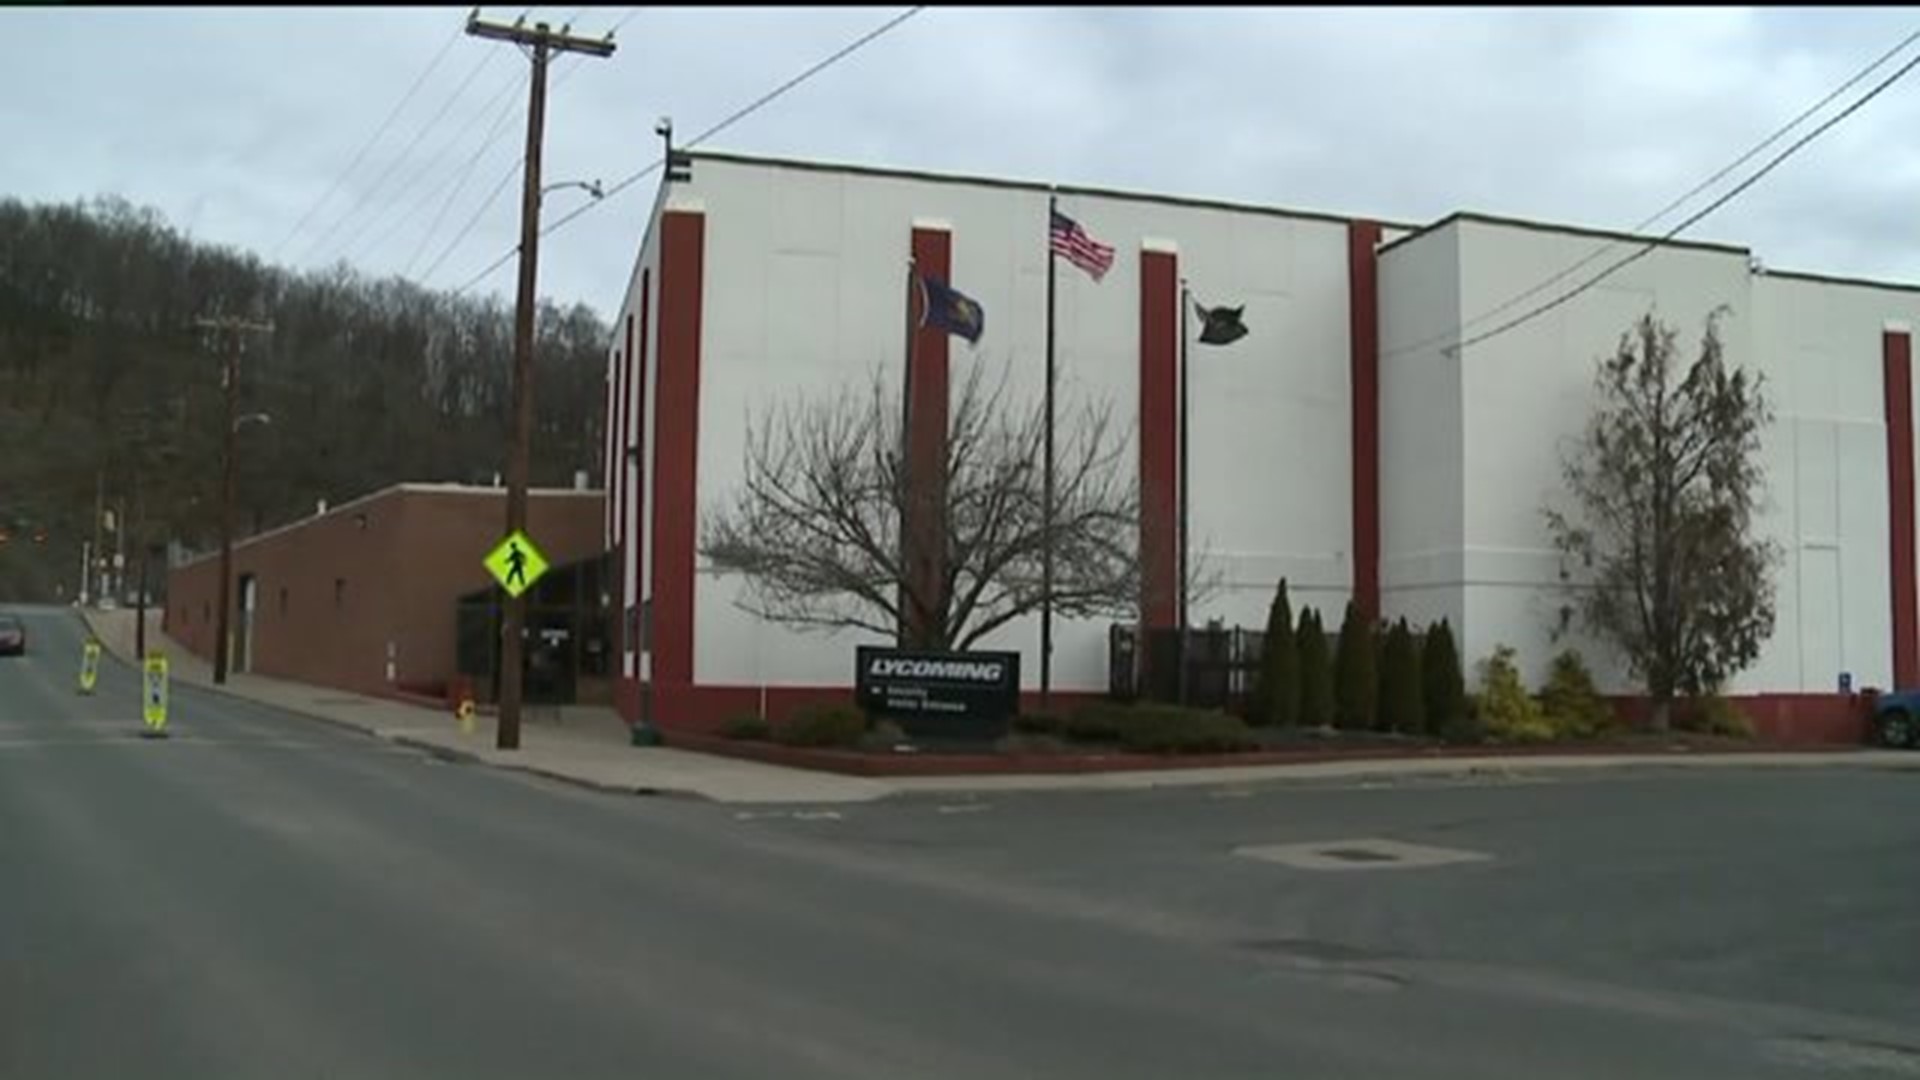 News Jobs Coming to Lycoming Engines in Williamsport